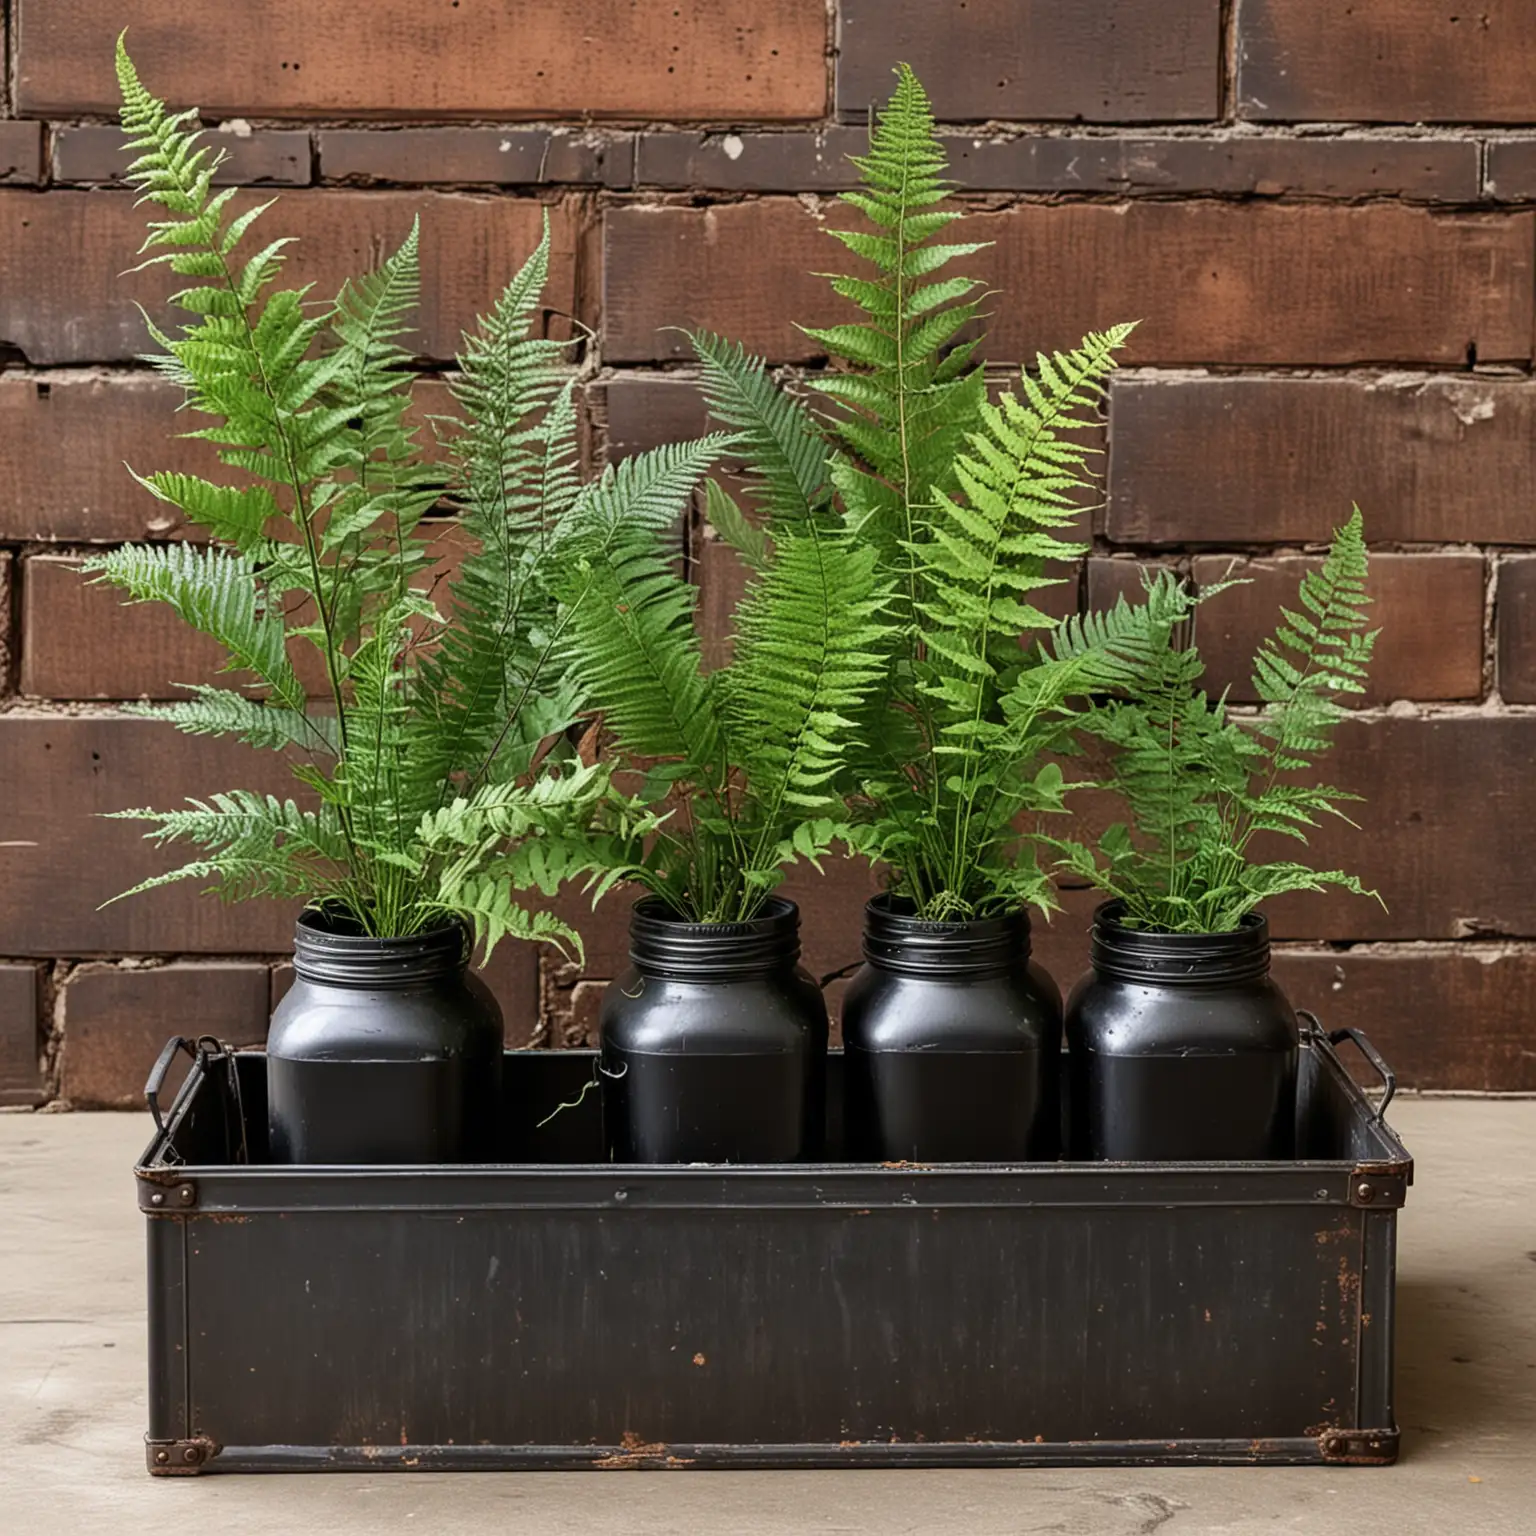 Modern-Industrial-Centerpiece-with-Black-Jars-and-Ferns-in-Rusted-Metal-Box